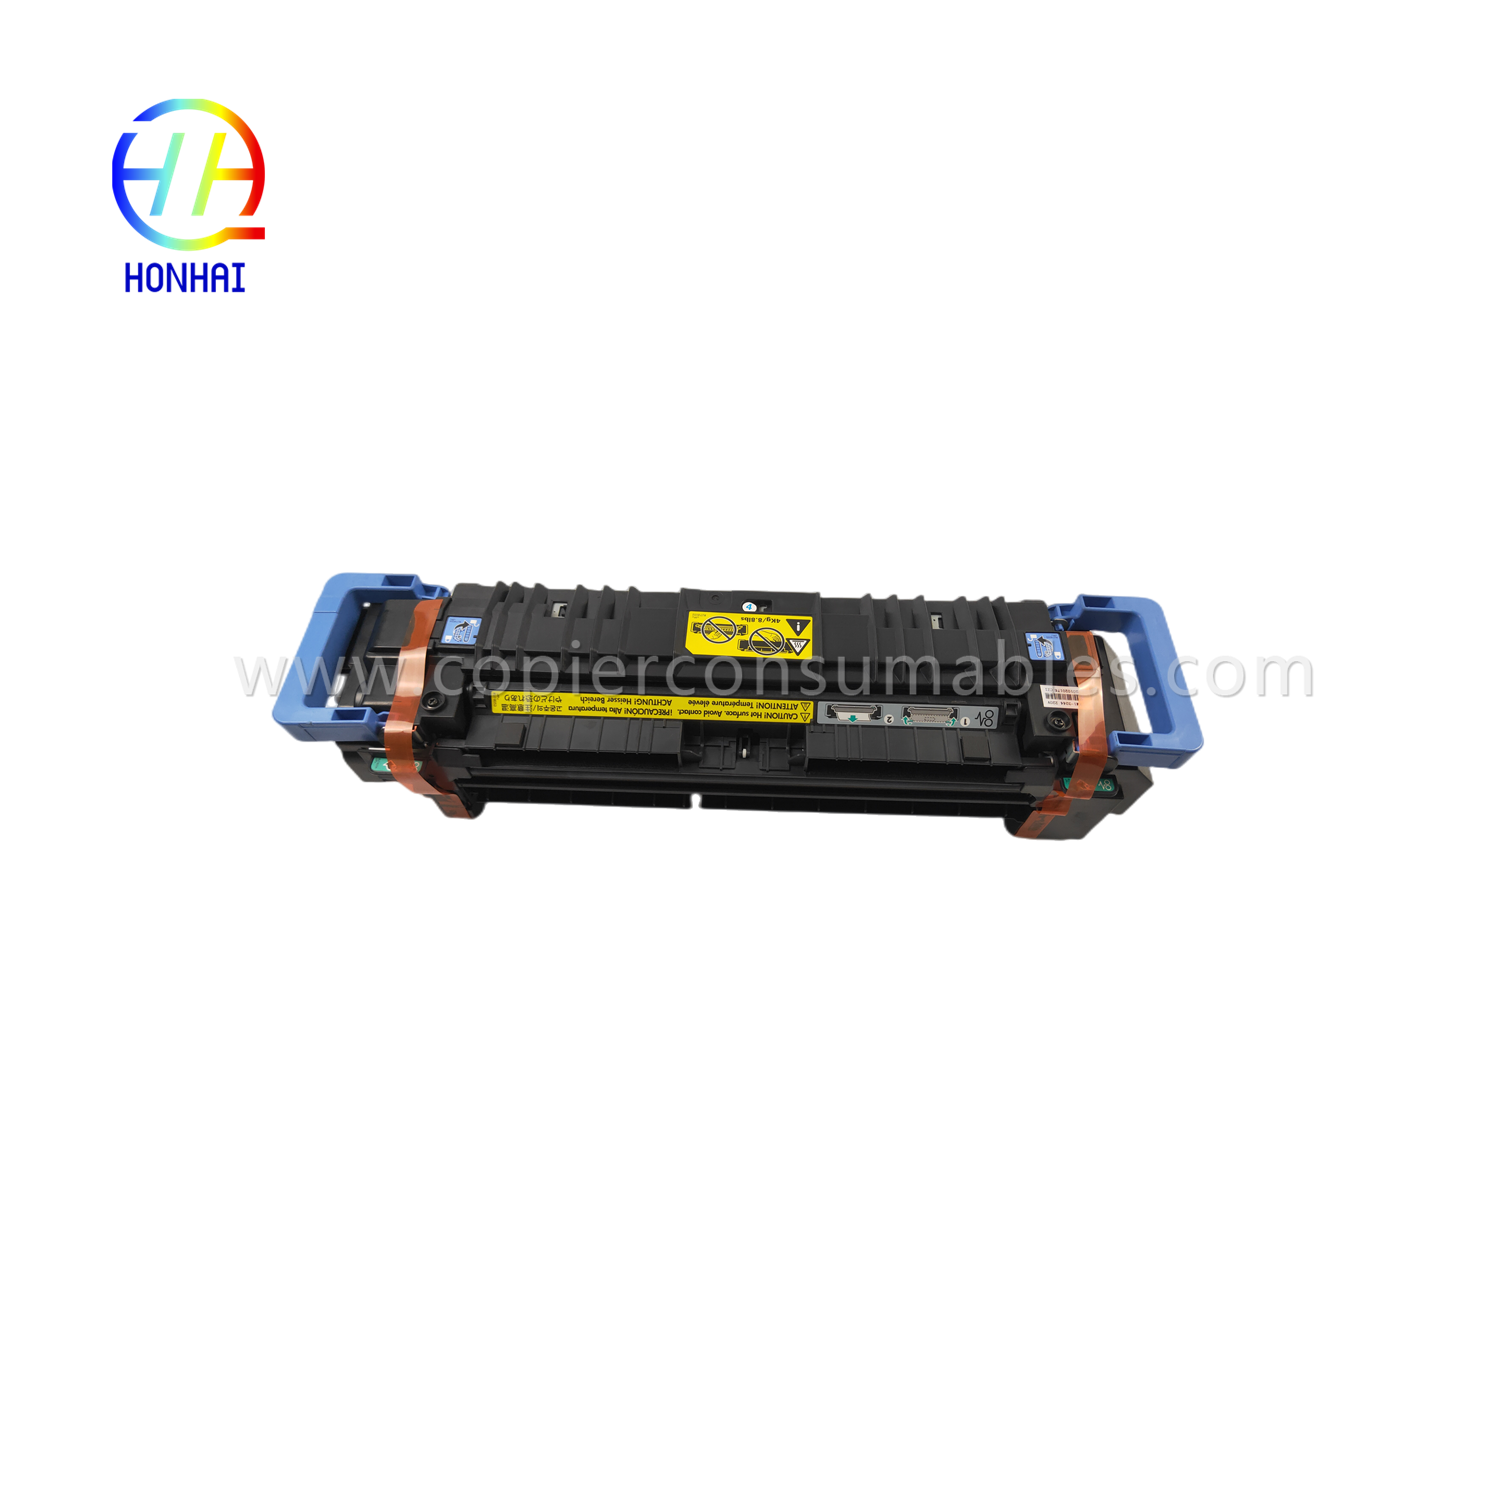 https://www.copierconsumables.com/fuser-assembly-unit-for-hp-m855-m880-m855dn-m855xh-m880z-m880z-c1n54-67901-c1n58-67901-fusing-heating-product/-assy